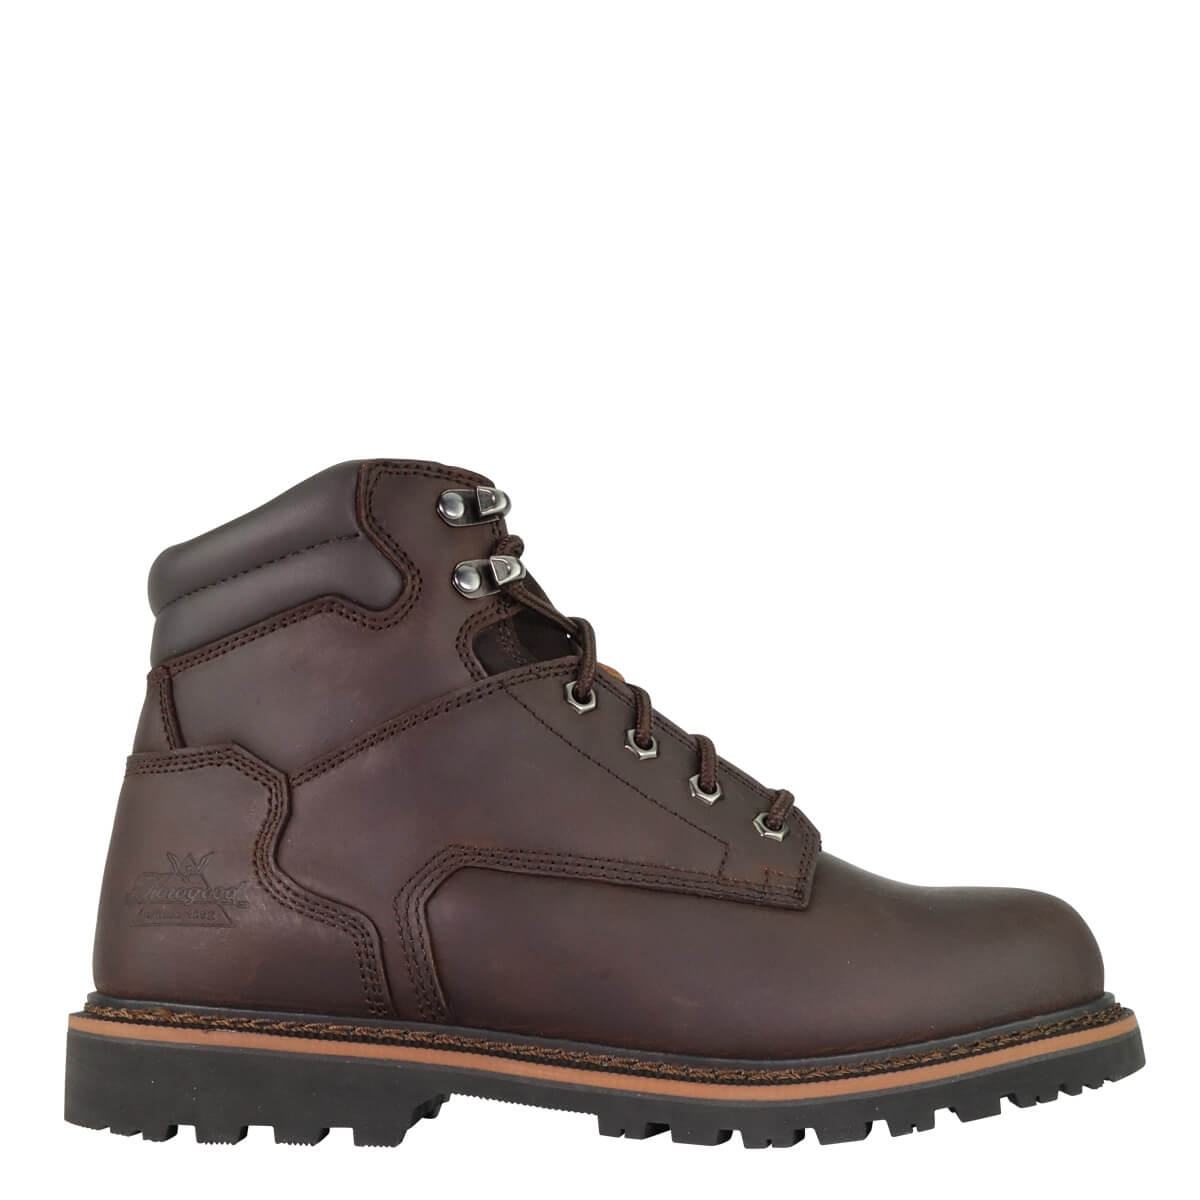 Thorogood V-Series 6 Inch Brown Steel Toe Boots from Columbia Safety